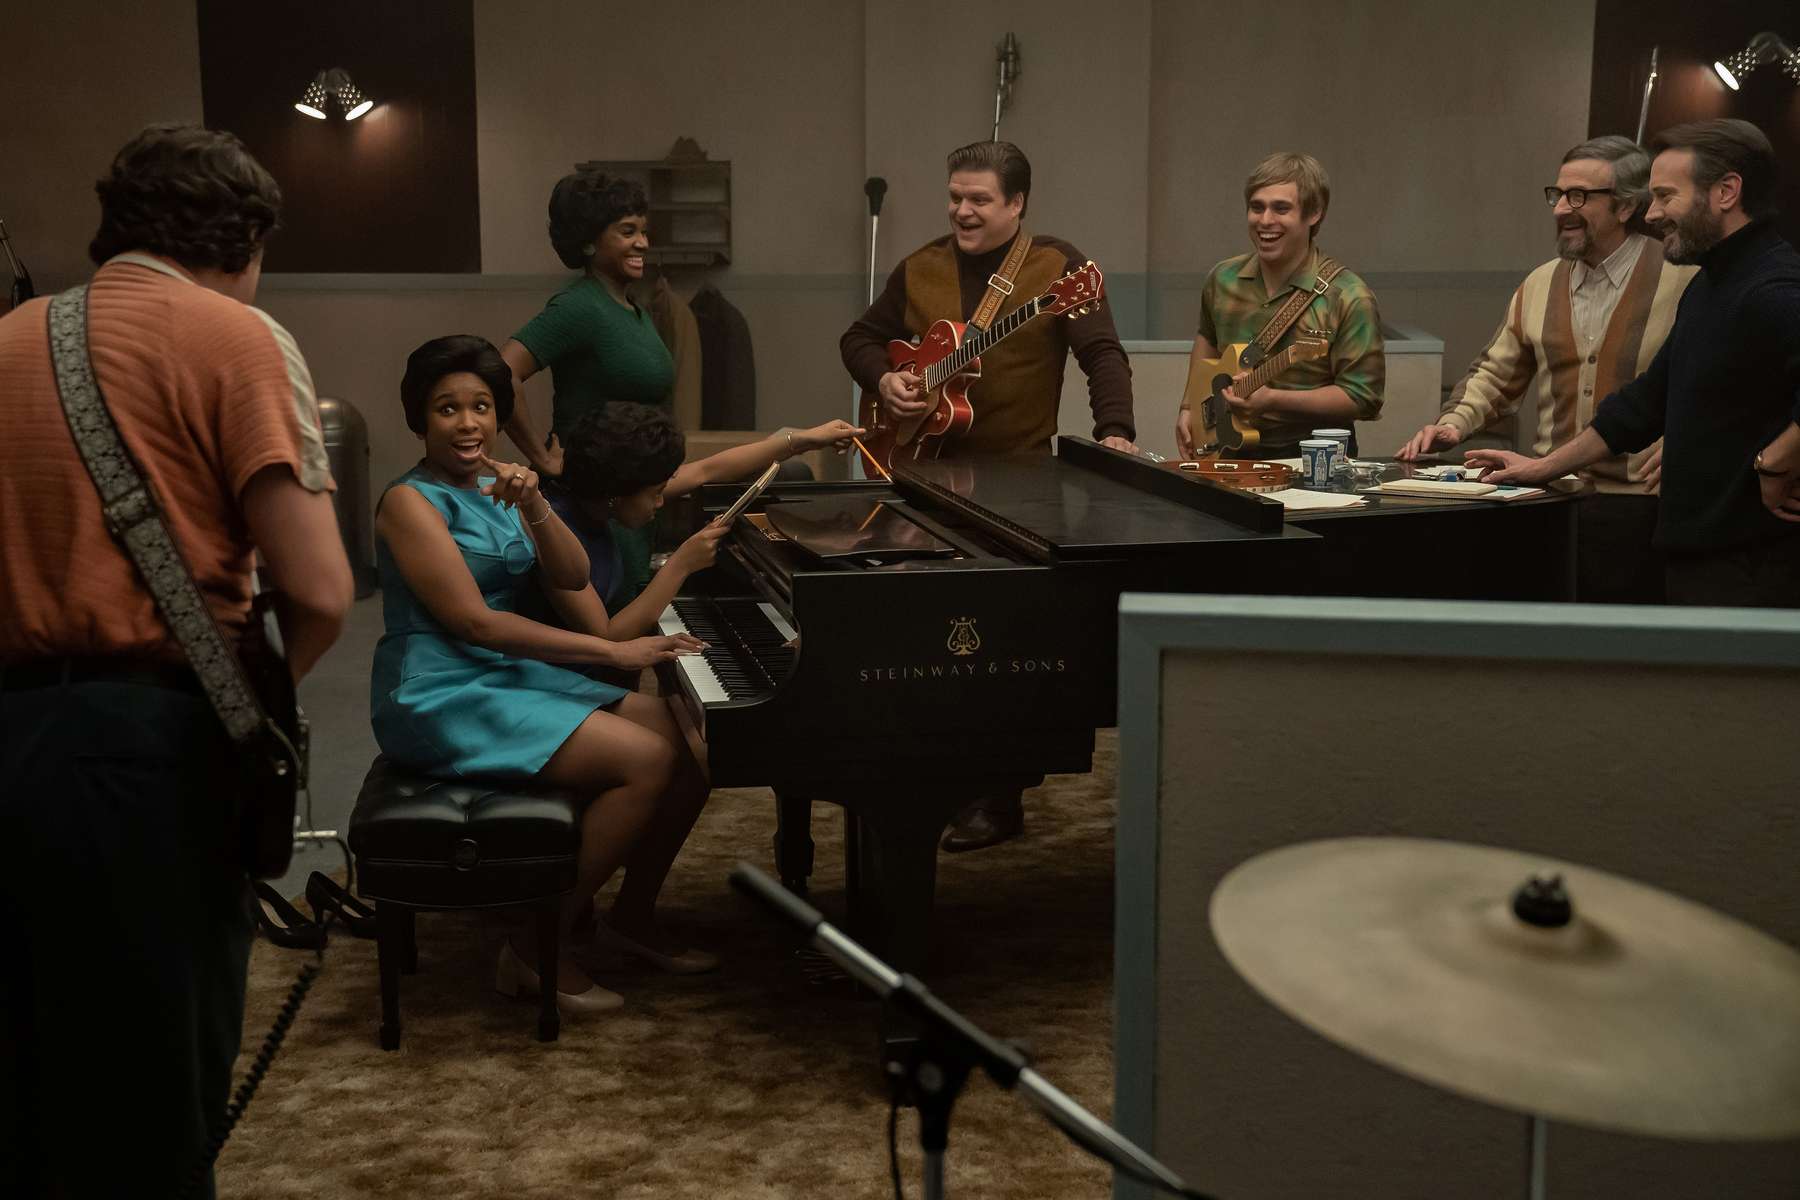 R_17527_RC(l-r.) Henry Riggs stars as Tommy Cogbill, Jennifer Hudson as Aretha Franklin, Hailey Kilgore as Carolyn Franklin, Saycon Sengbloh as Erma Franklin, Alec Barnes as Jimmy Johnson, John Giorgio as Chips Moman, Marc Maron as Jerry Wexler and Joe Knezevich as Tom Dowd inRESPECT, A Metro Goldwyn Mayer Pictures filmPhoto credit: Quantrell D. Colbert